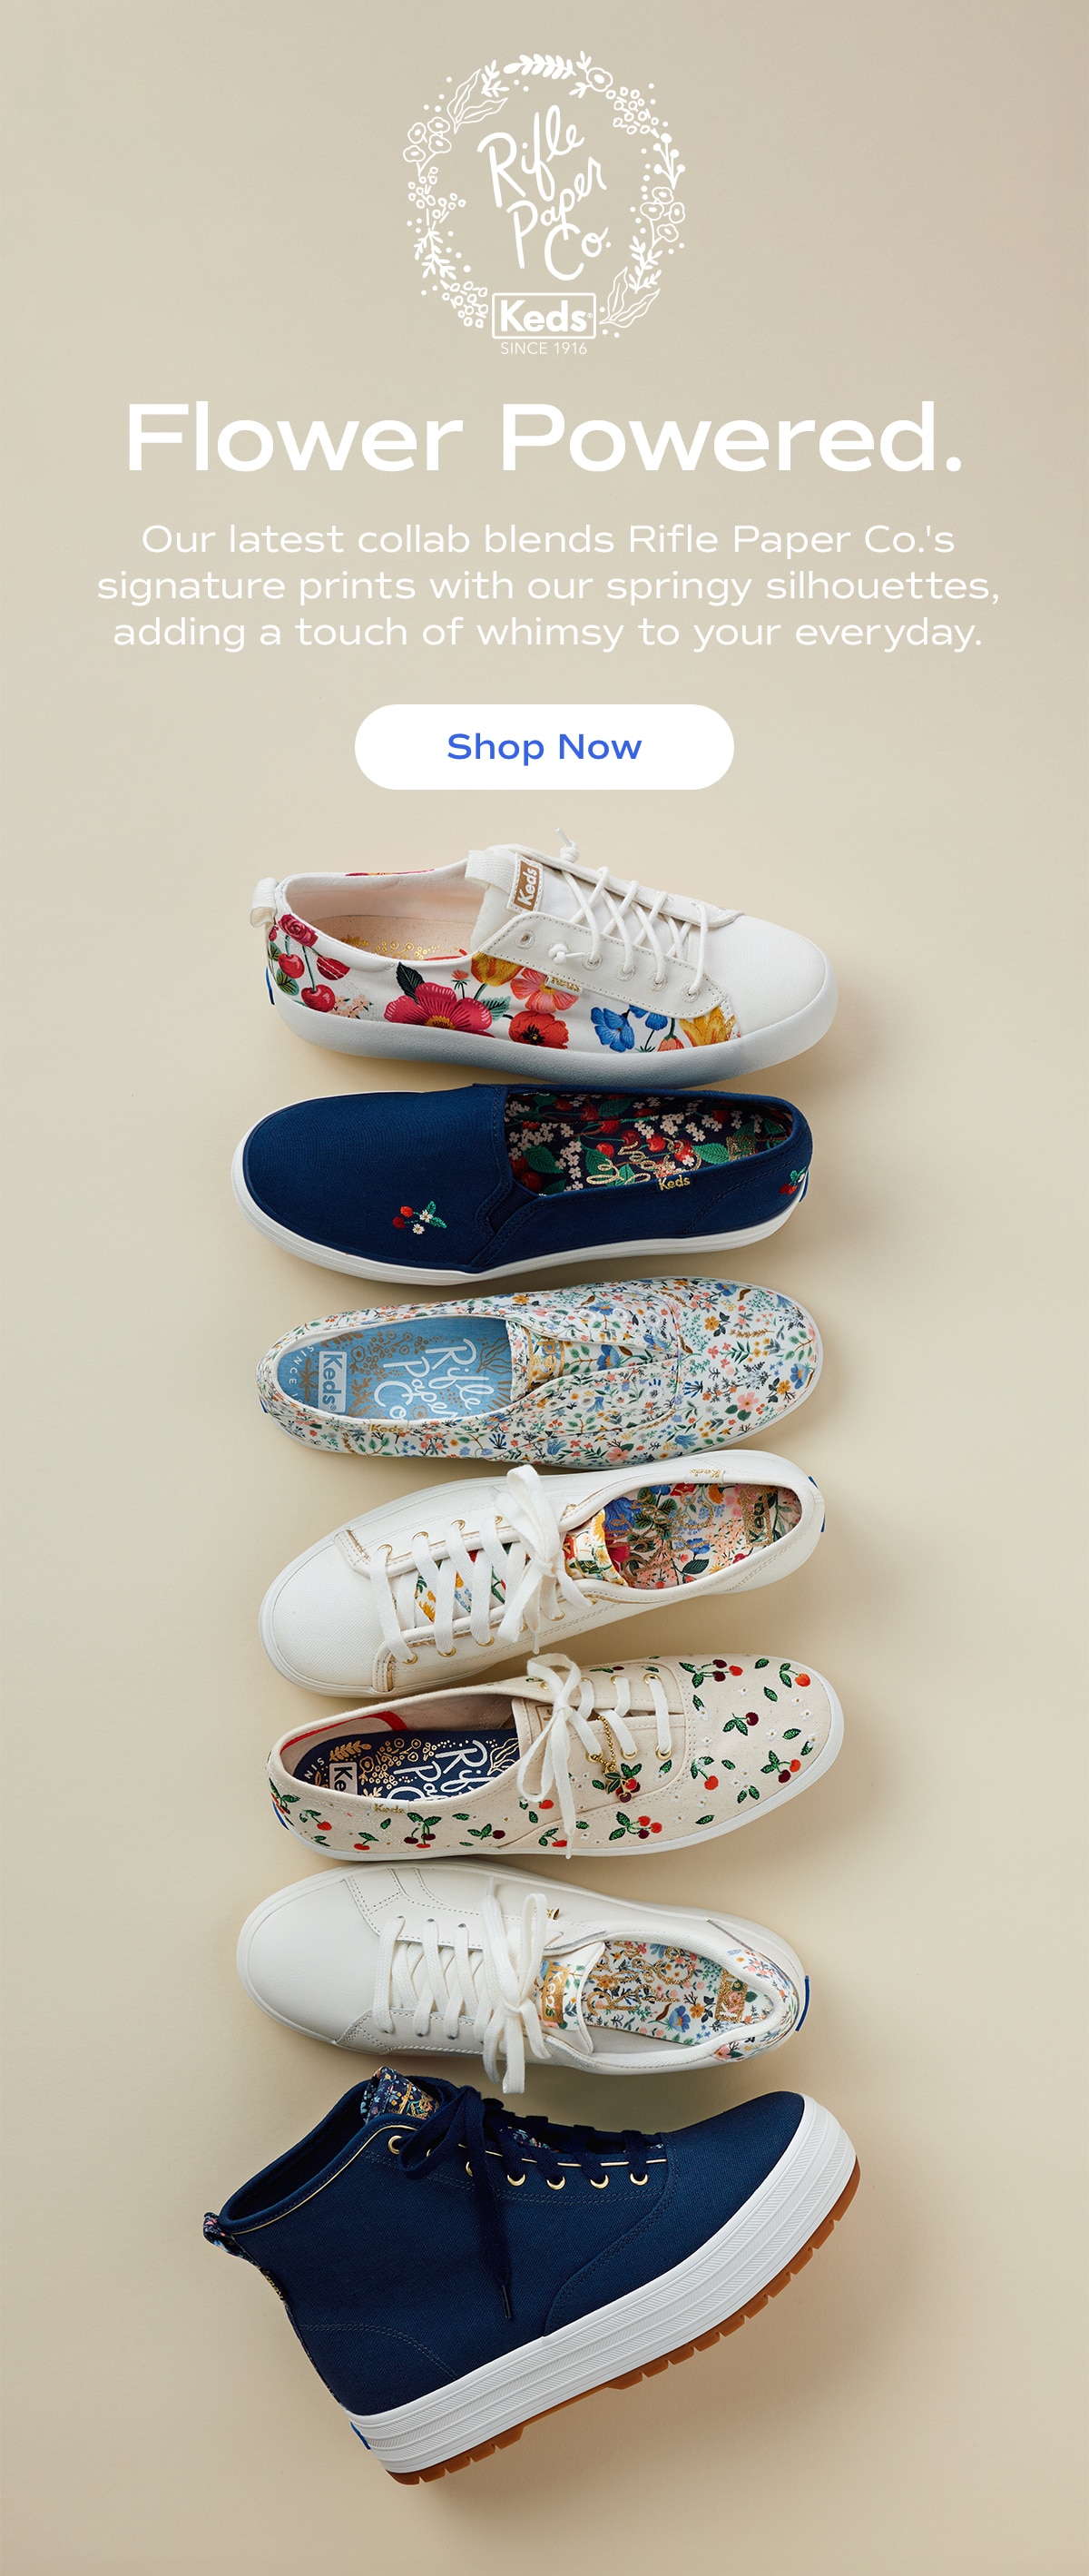 Rifle Paper Co. | Keds SINCE 1916 | Flower Powered. Our latest collab blends Rifle Paper Co.'s signature prints with our springy silhouettes, adding a touch of whimsy to your everyday. | Shop Now